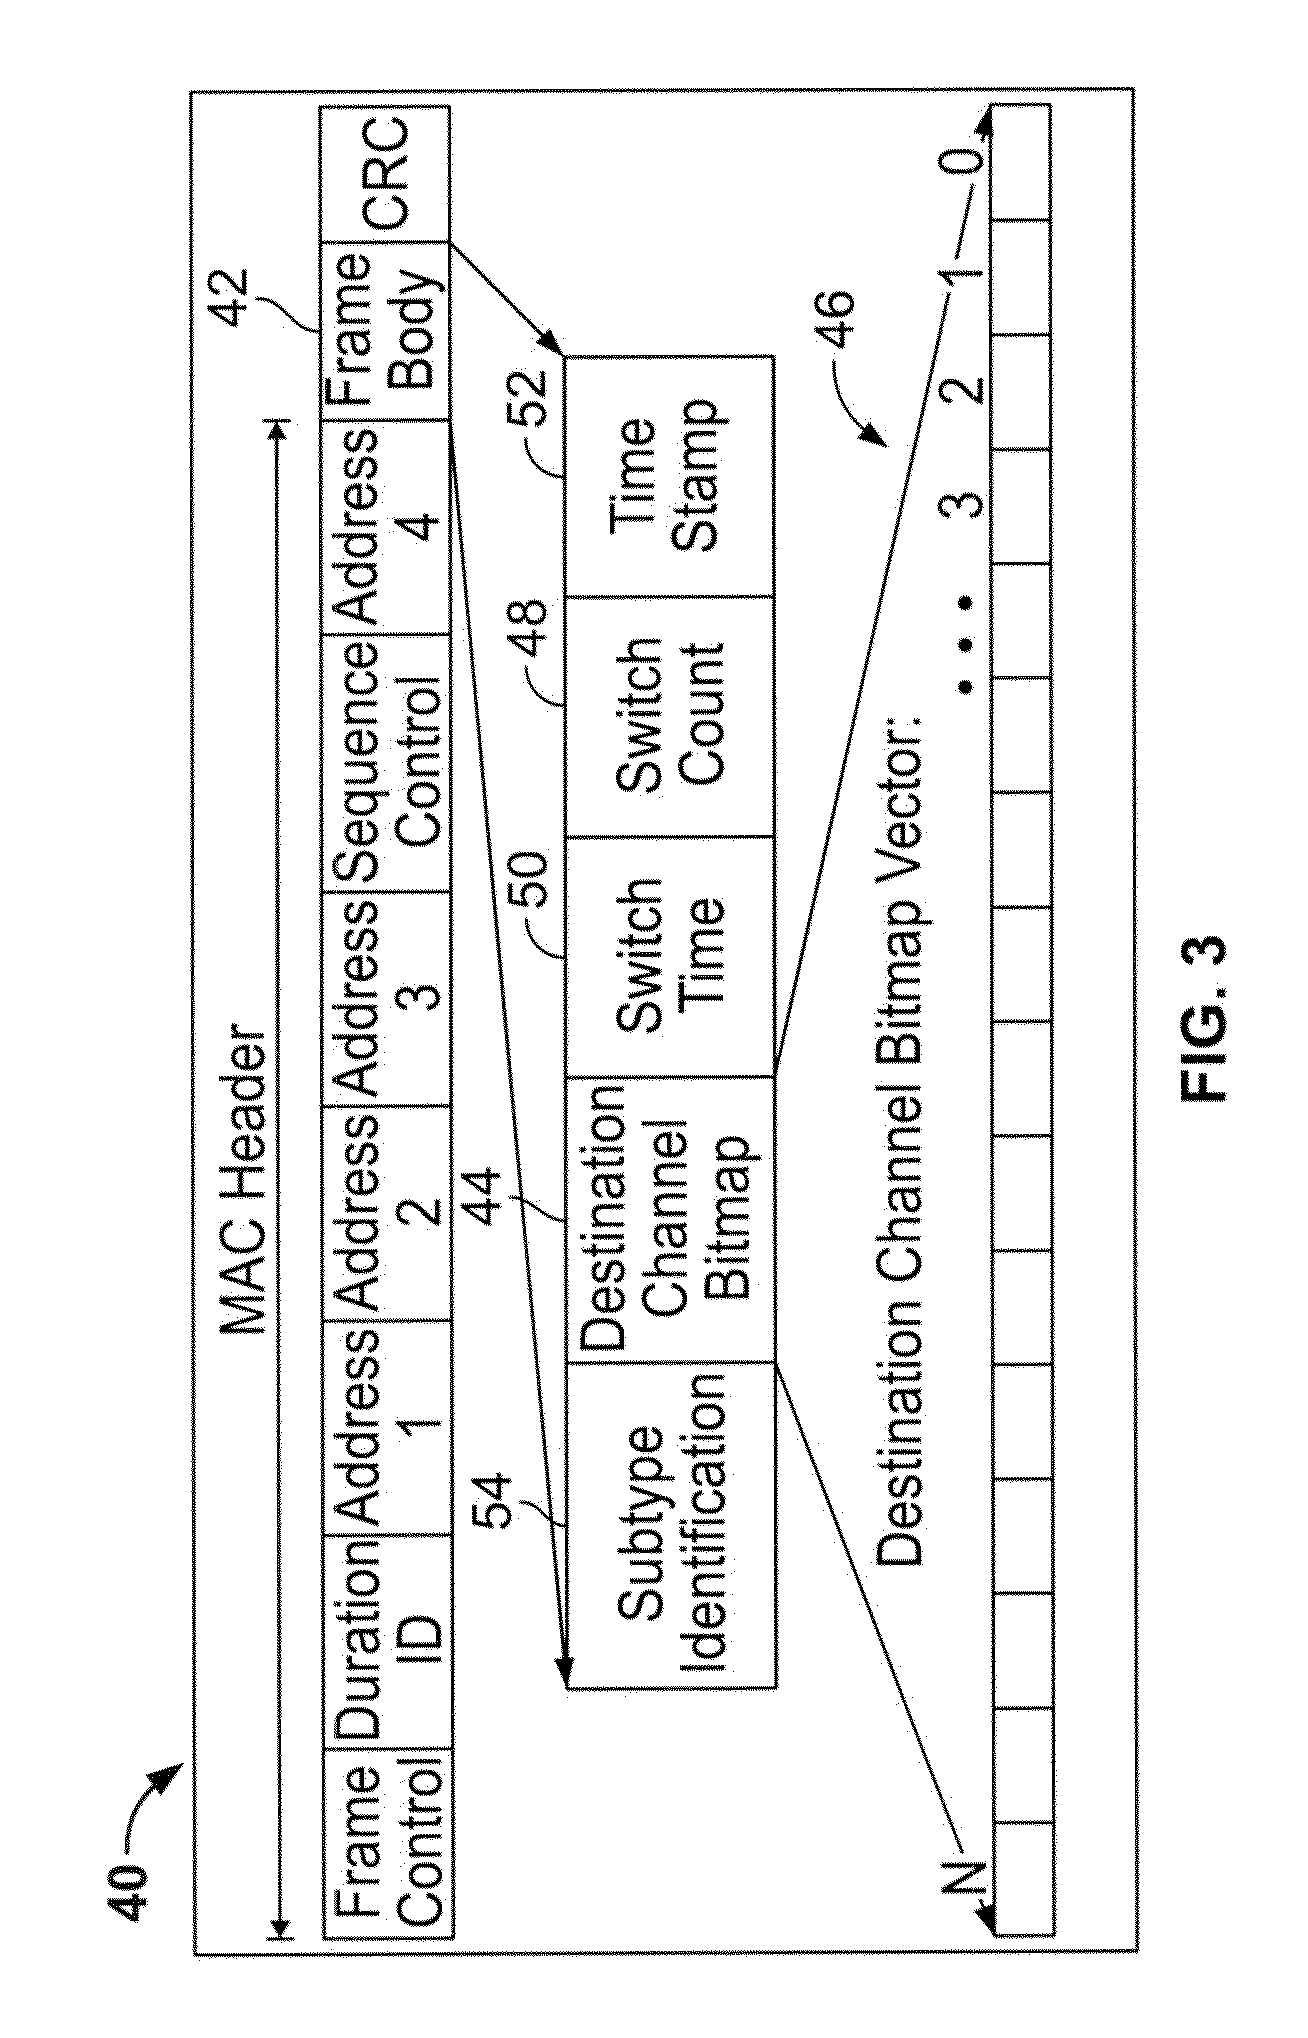 Method and apparatus for dynamic spectrum access